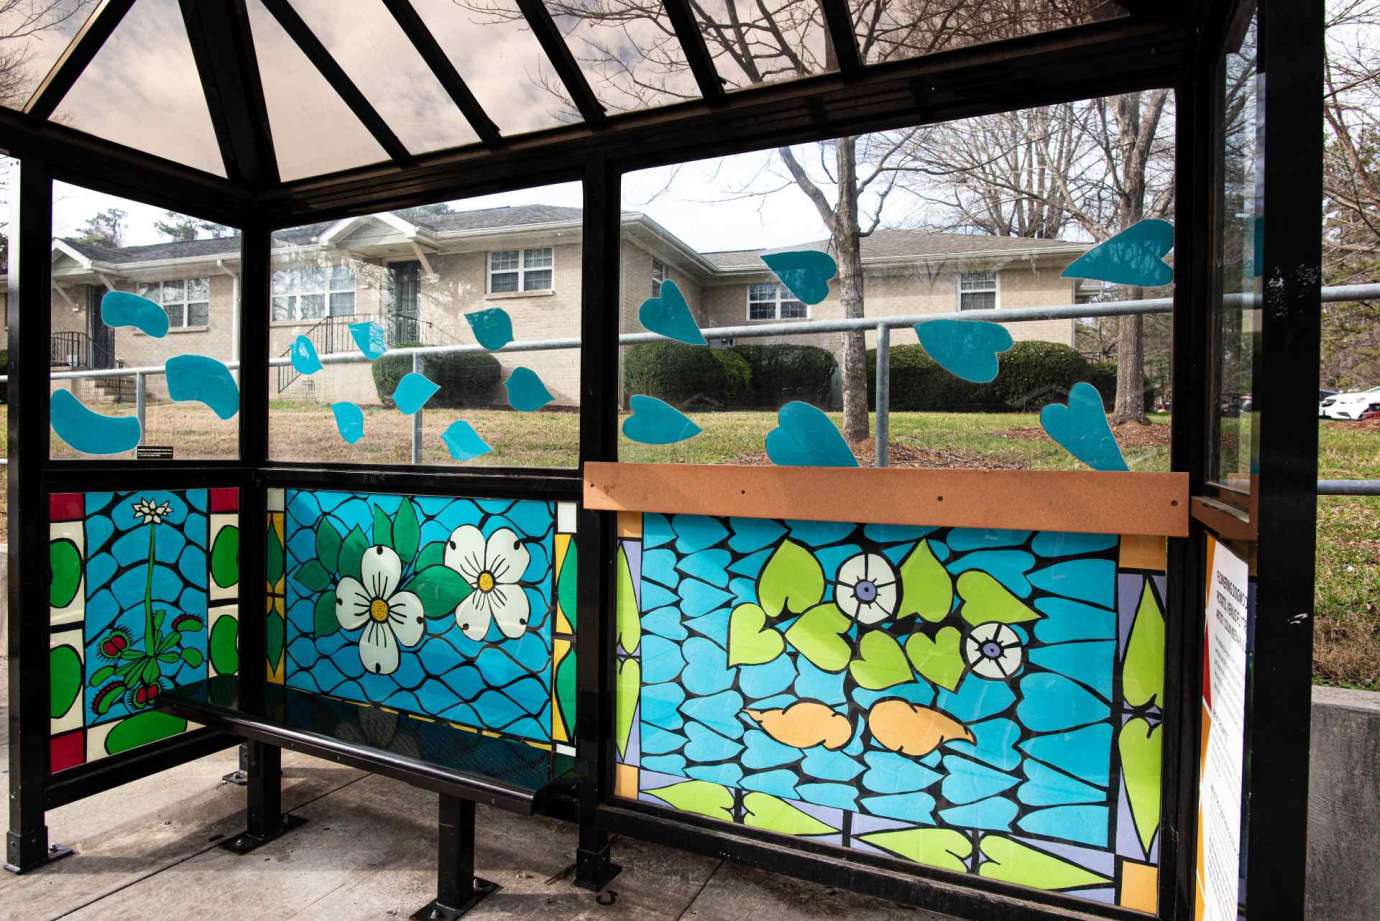 Artwork wrapped on bus shelter windows titled Flowering Dogwood, Sweet Potato, Venus flytrap by  Colin Keenan & Julie Cook located  Glenbrook Drive at Dacian Road (southbound)